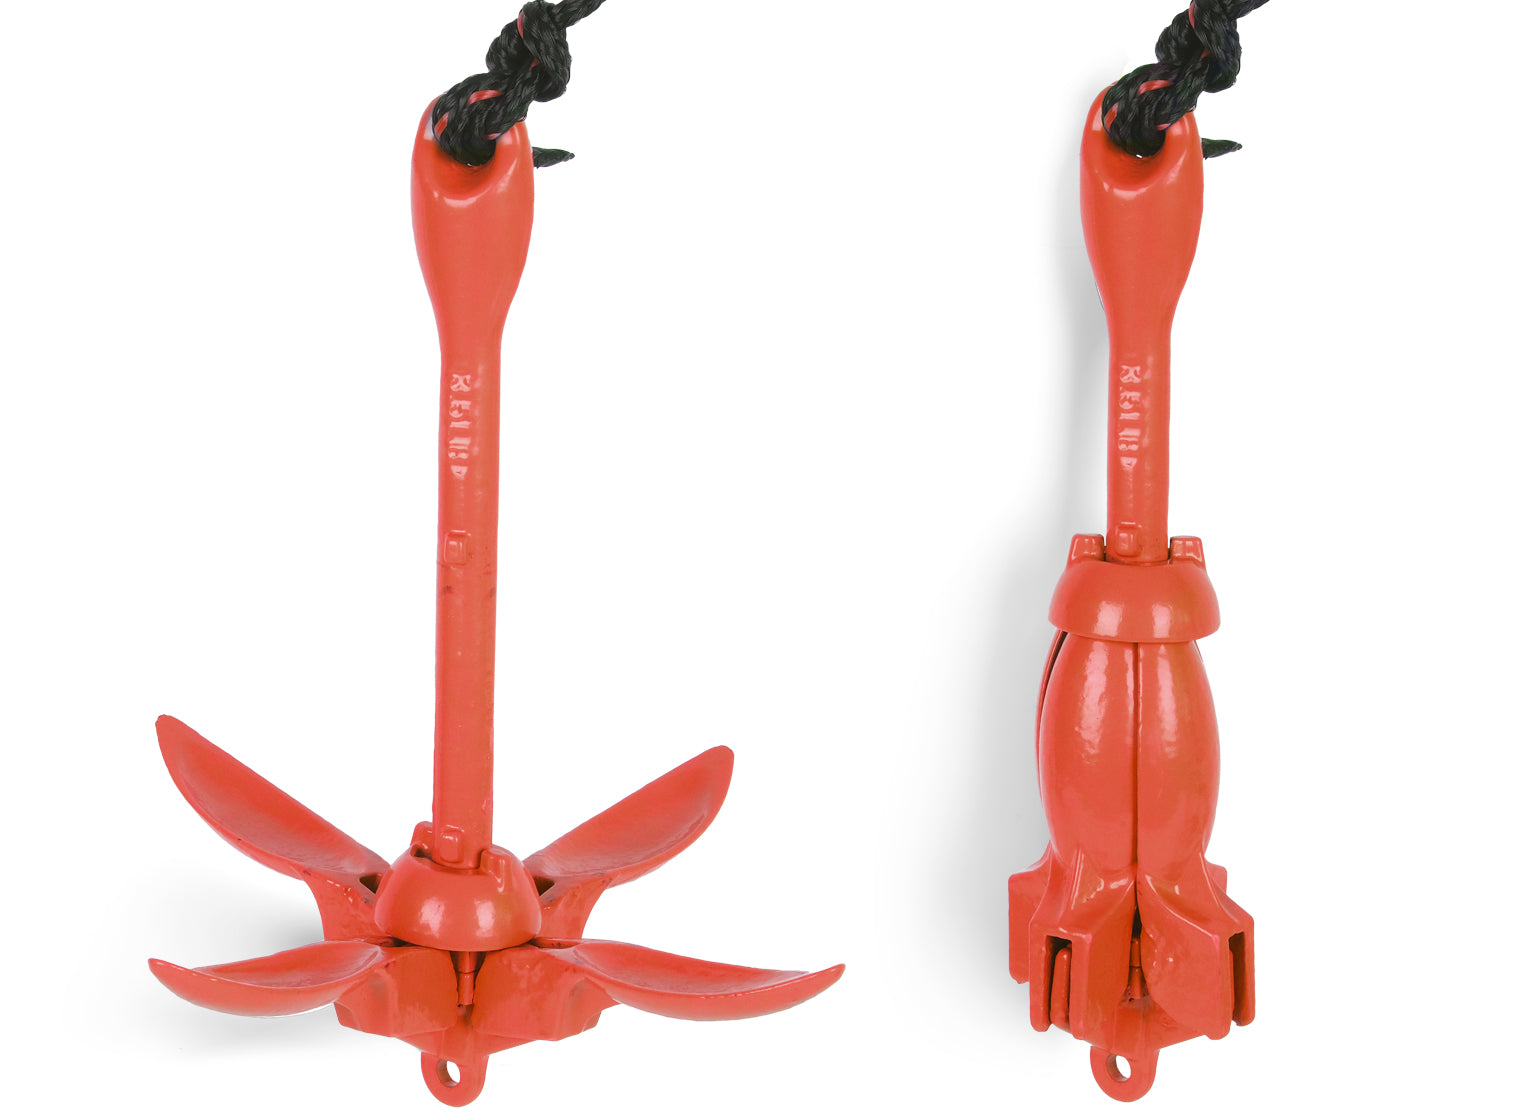 JAWS Anchor by SandShark, New! Grapnel Type Folding Anchor Kit